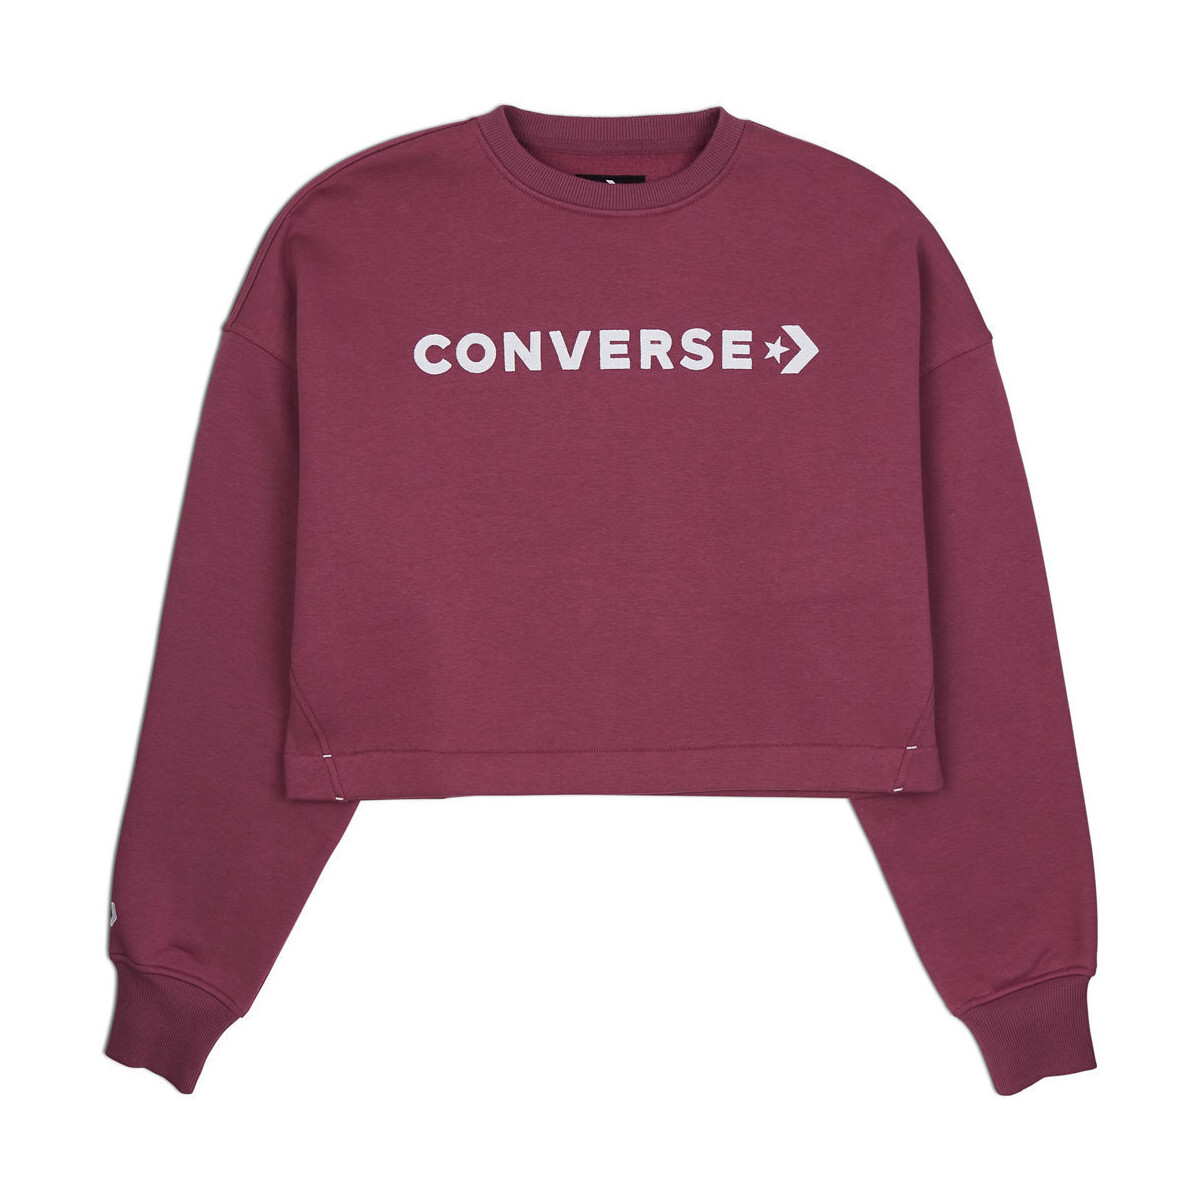 Vêtements Femme Sweats Converse EMBROIDERED CROPPED CREW Rose